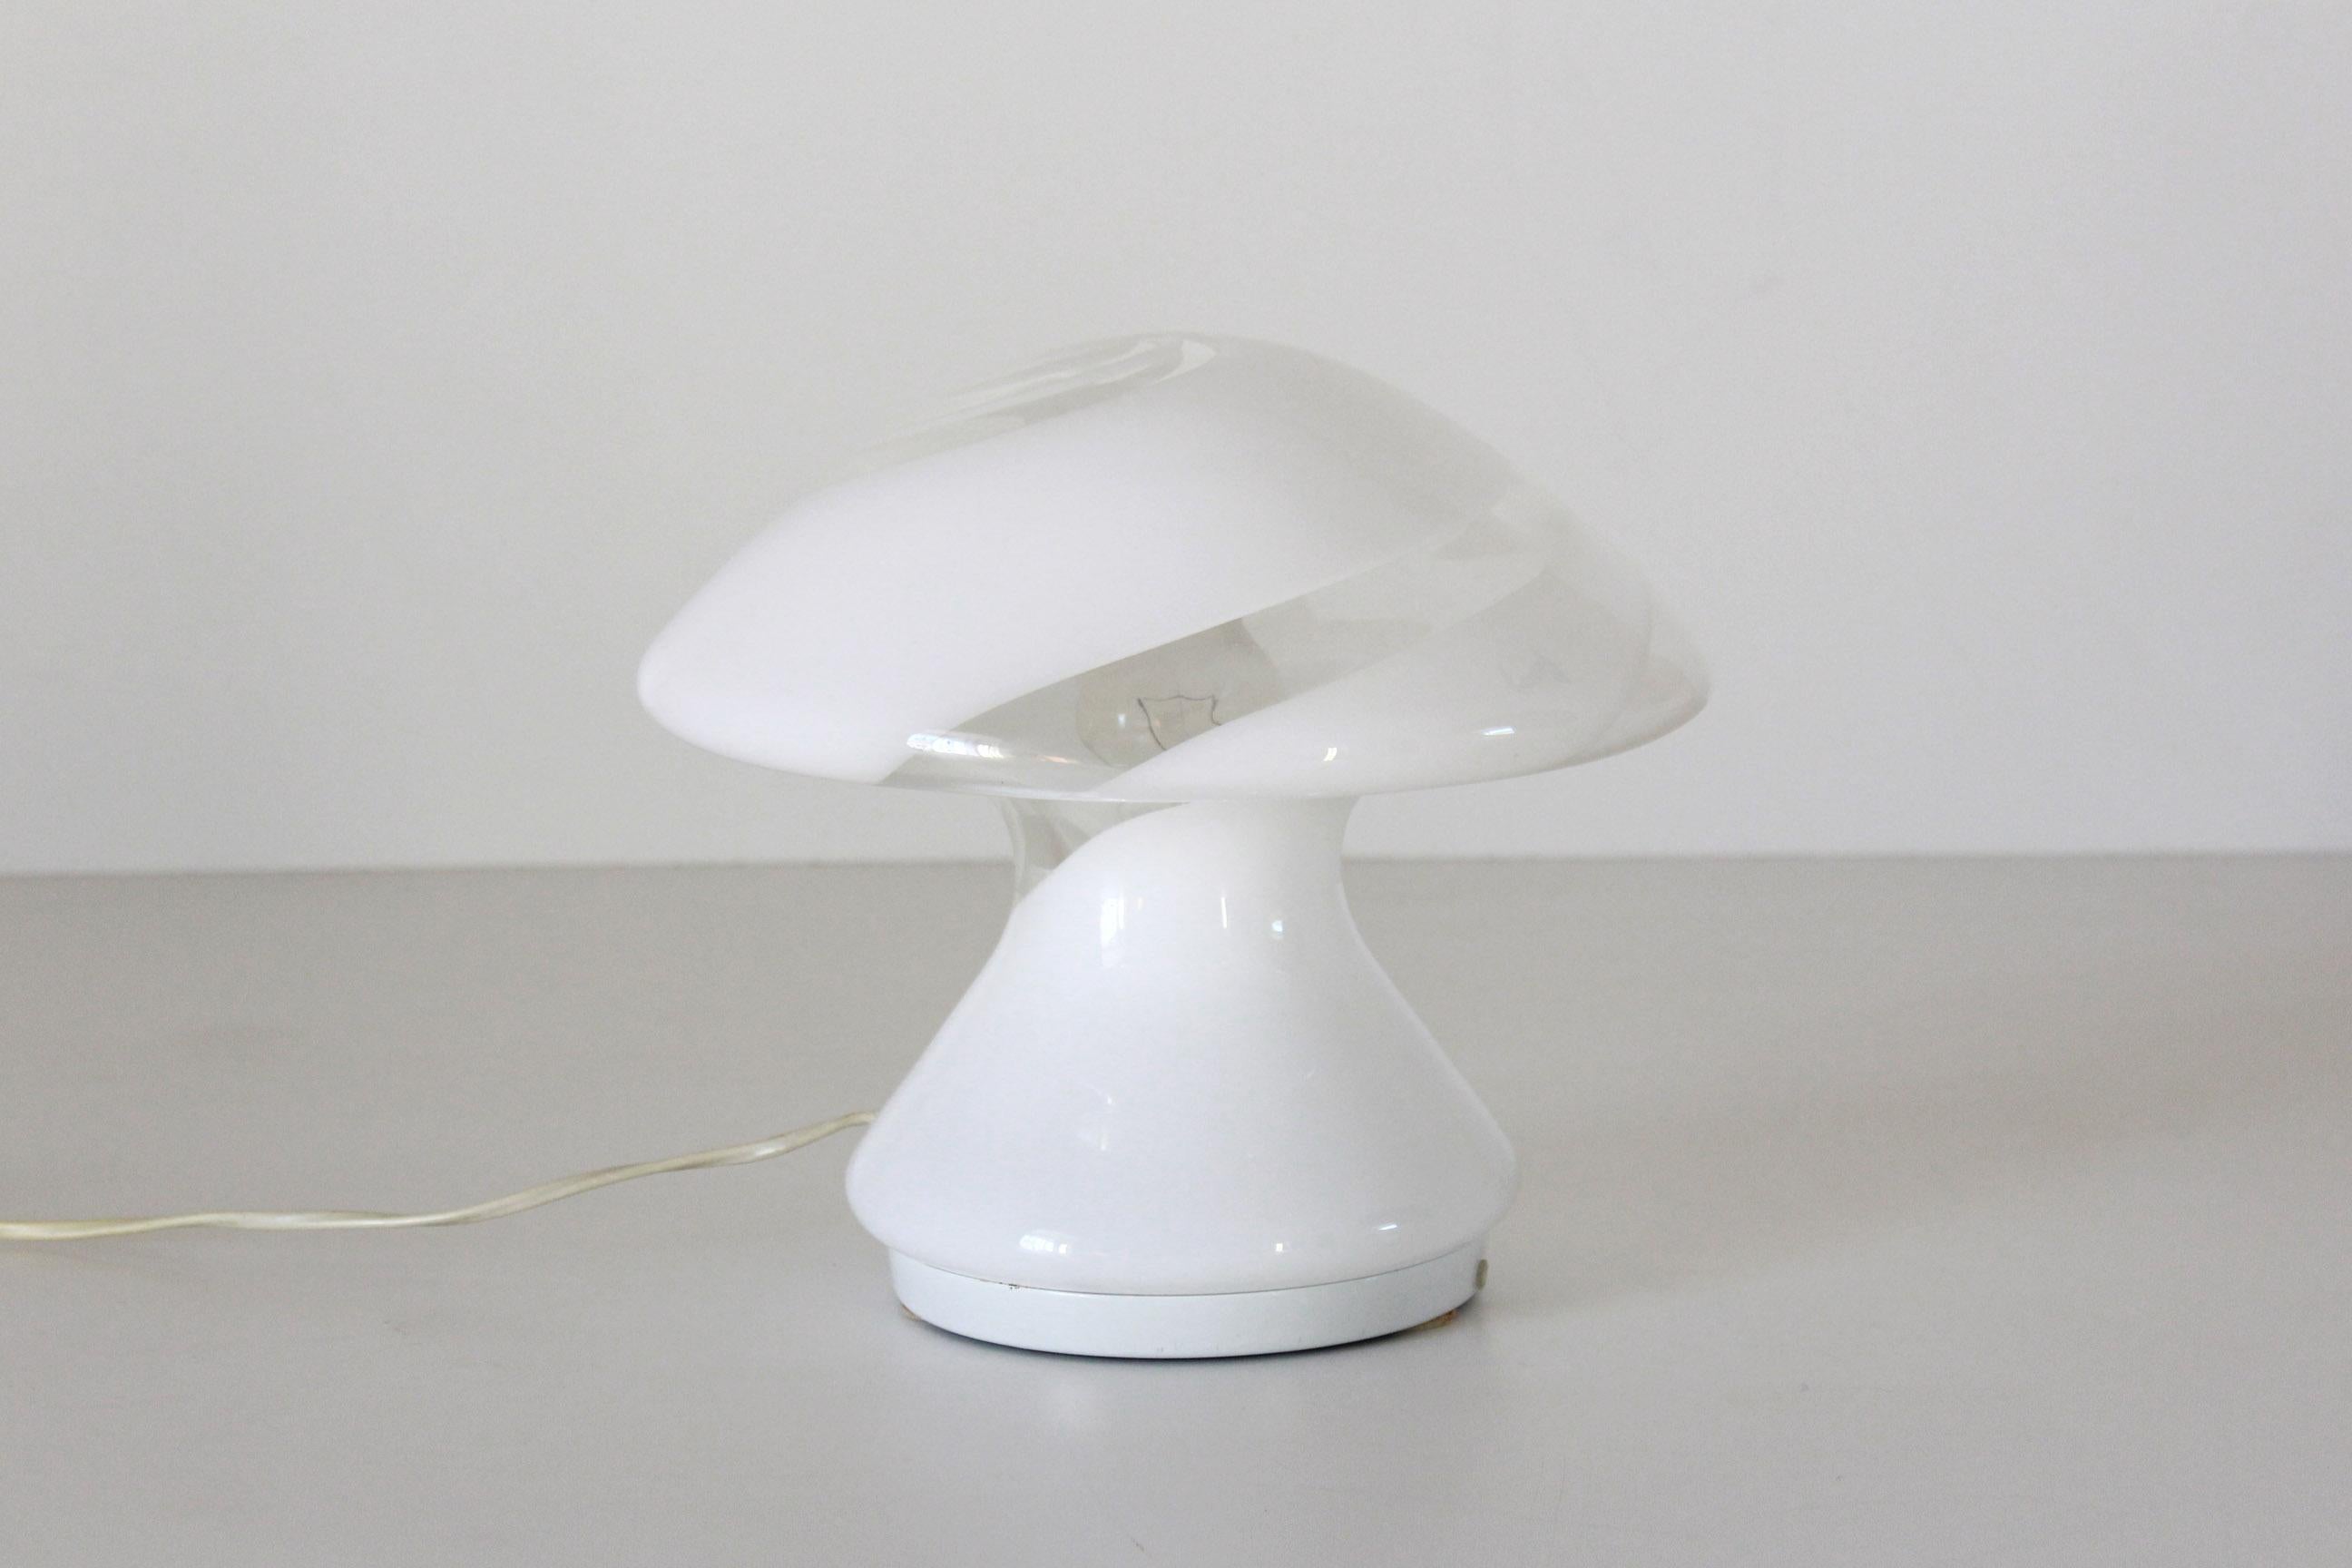 Vintage Table Lamp in Murano Glass, Carlo Nason for Mazzega, Italy 1960s.
A beautiful Murano table lamp mushroom shape Murano glass designed by Carlo Nason for Mazzega in the 1960
In very good conditions with only some sign of time on the base.